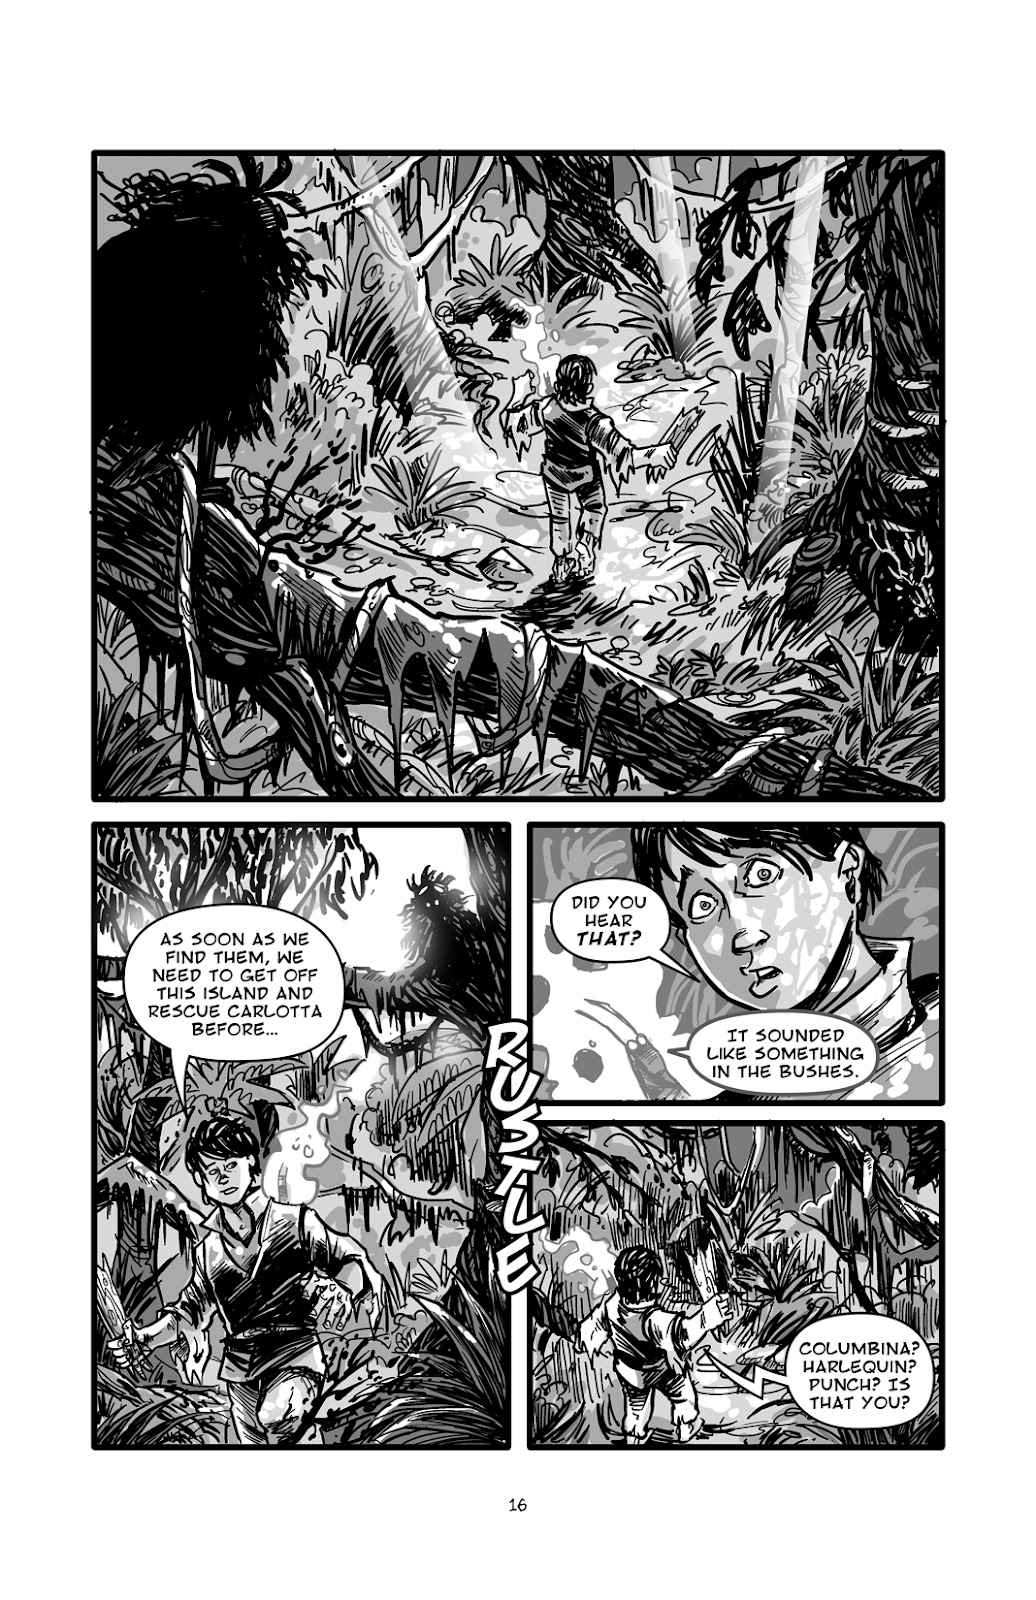 Pinocchio: Vampire Slayer - Of Wood and Blood issue 1 - Page 17